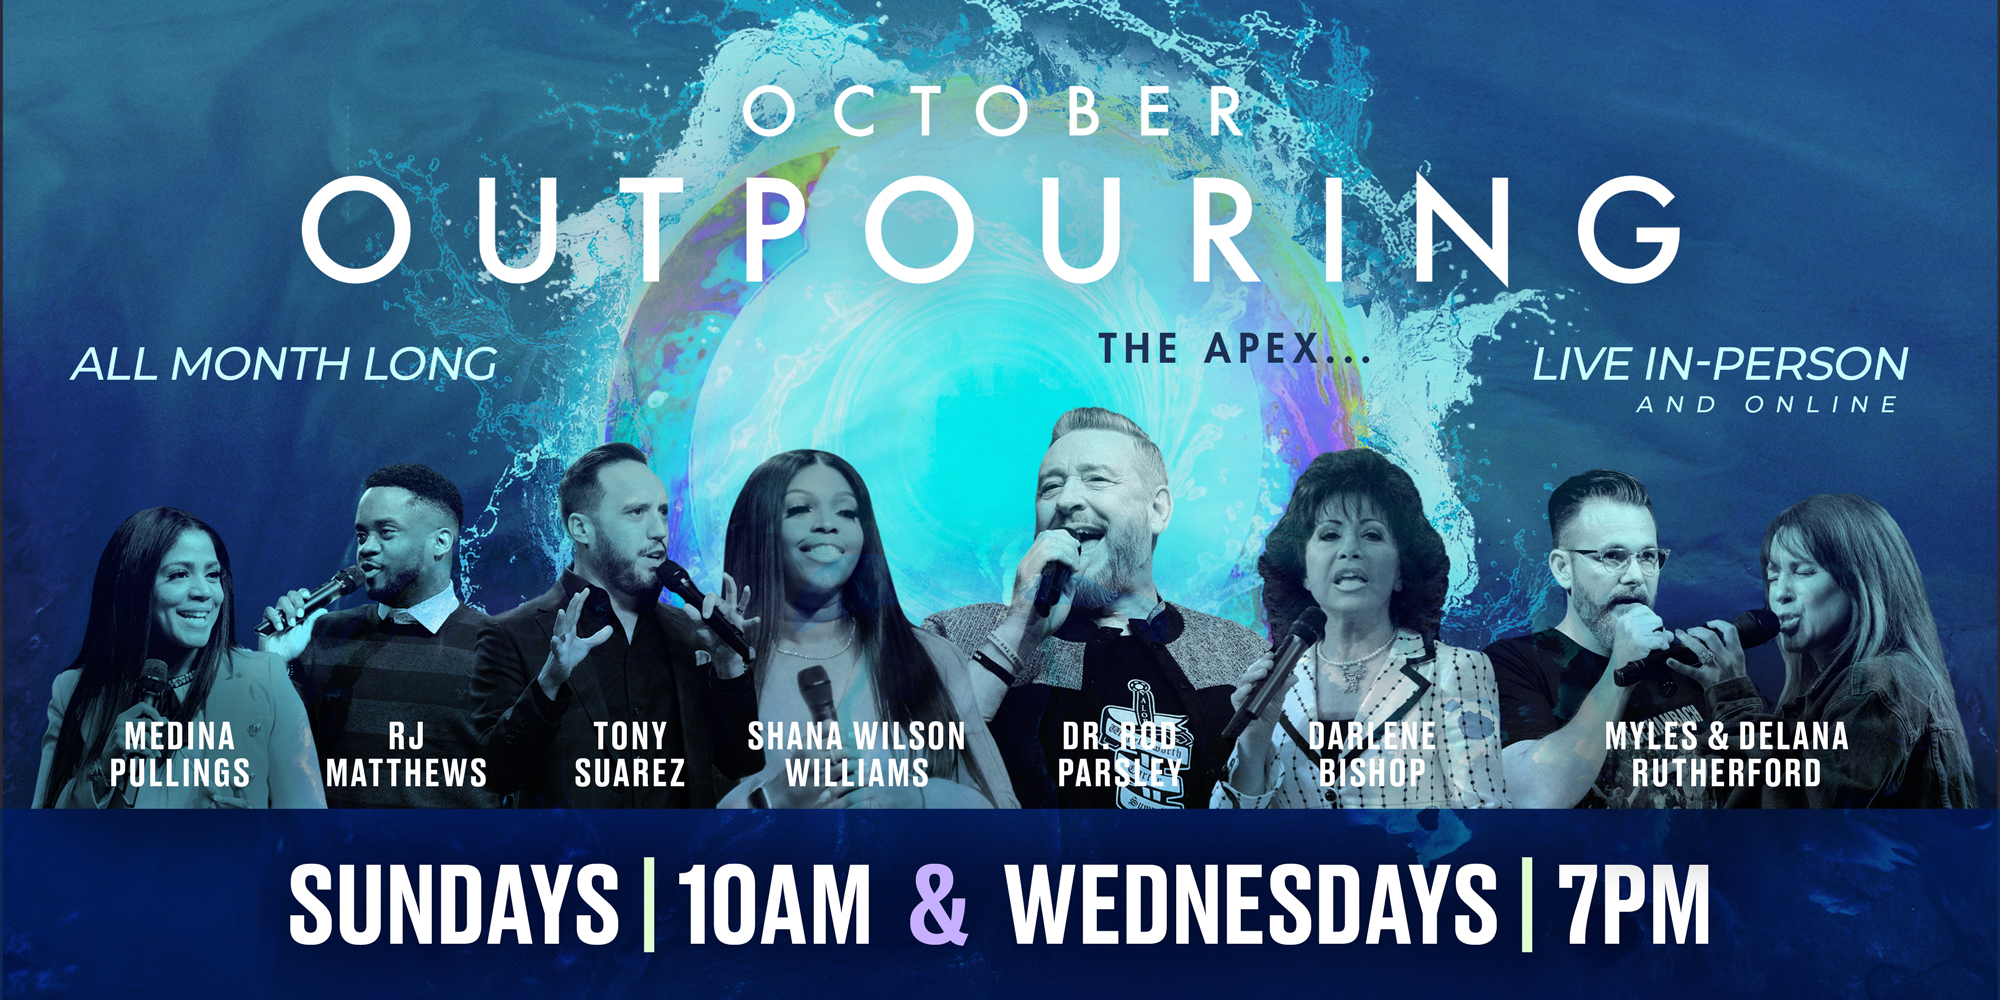 October Outpouring All Month Long The Apex... Live In-Person and Online Sundays 10AM and Wednesdays 7PM